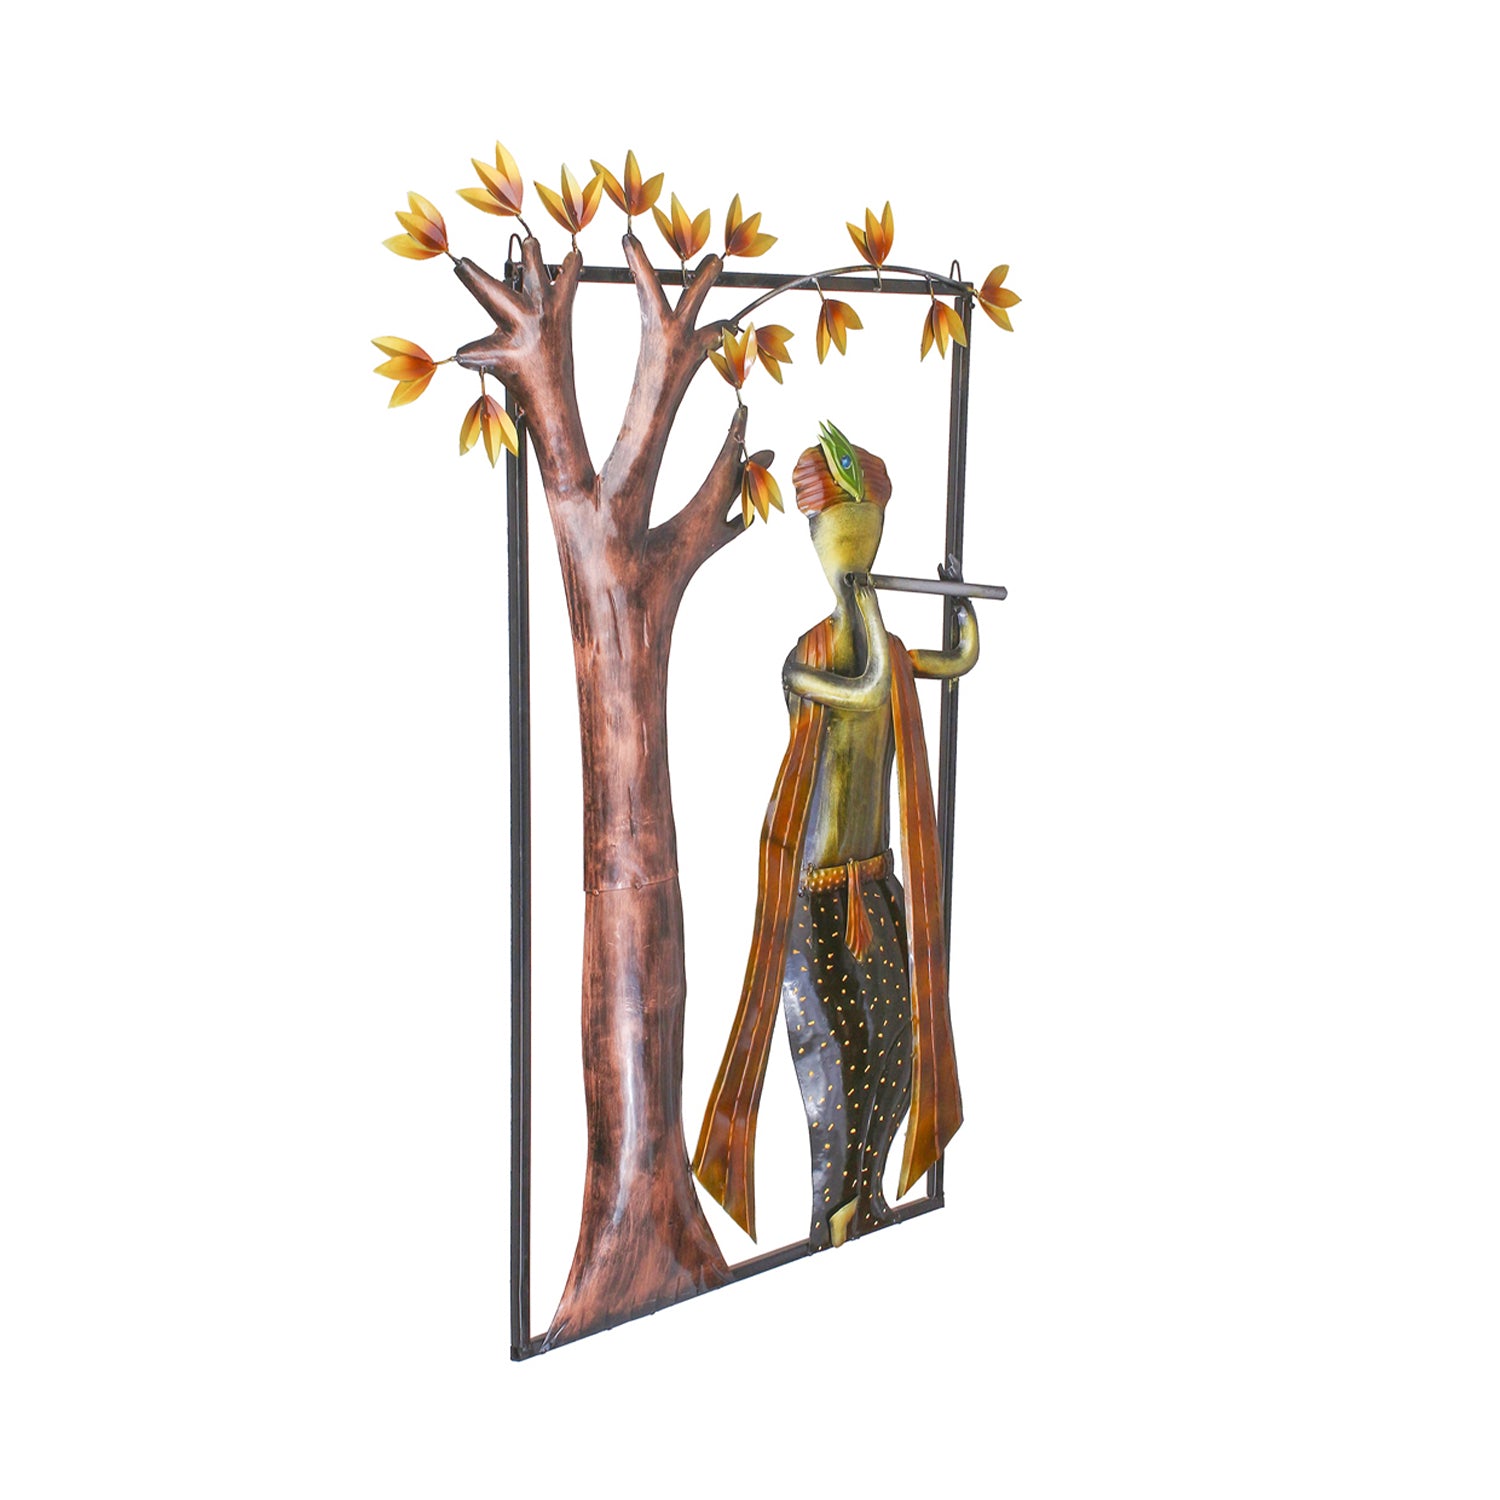 Lord Krishna Playing Flute Under Tree Handcrafted Iron Wall Hanging Decor 3